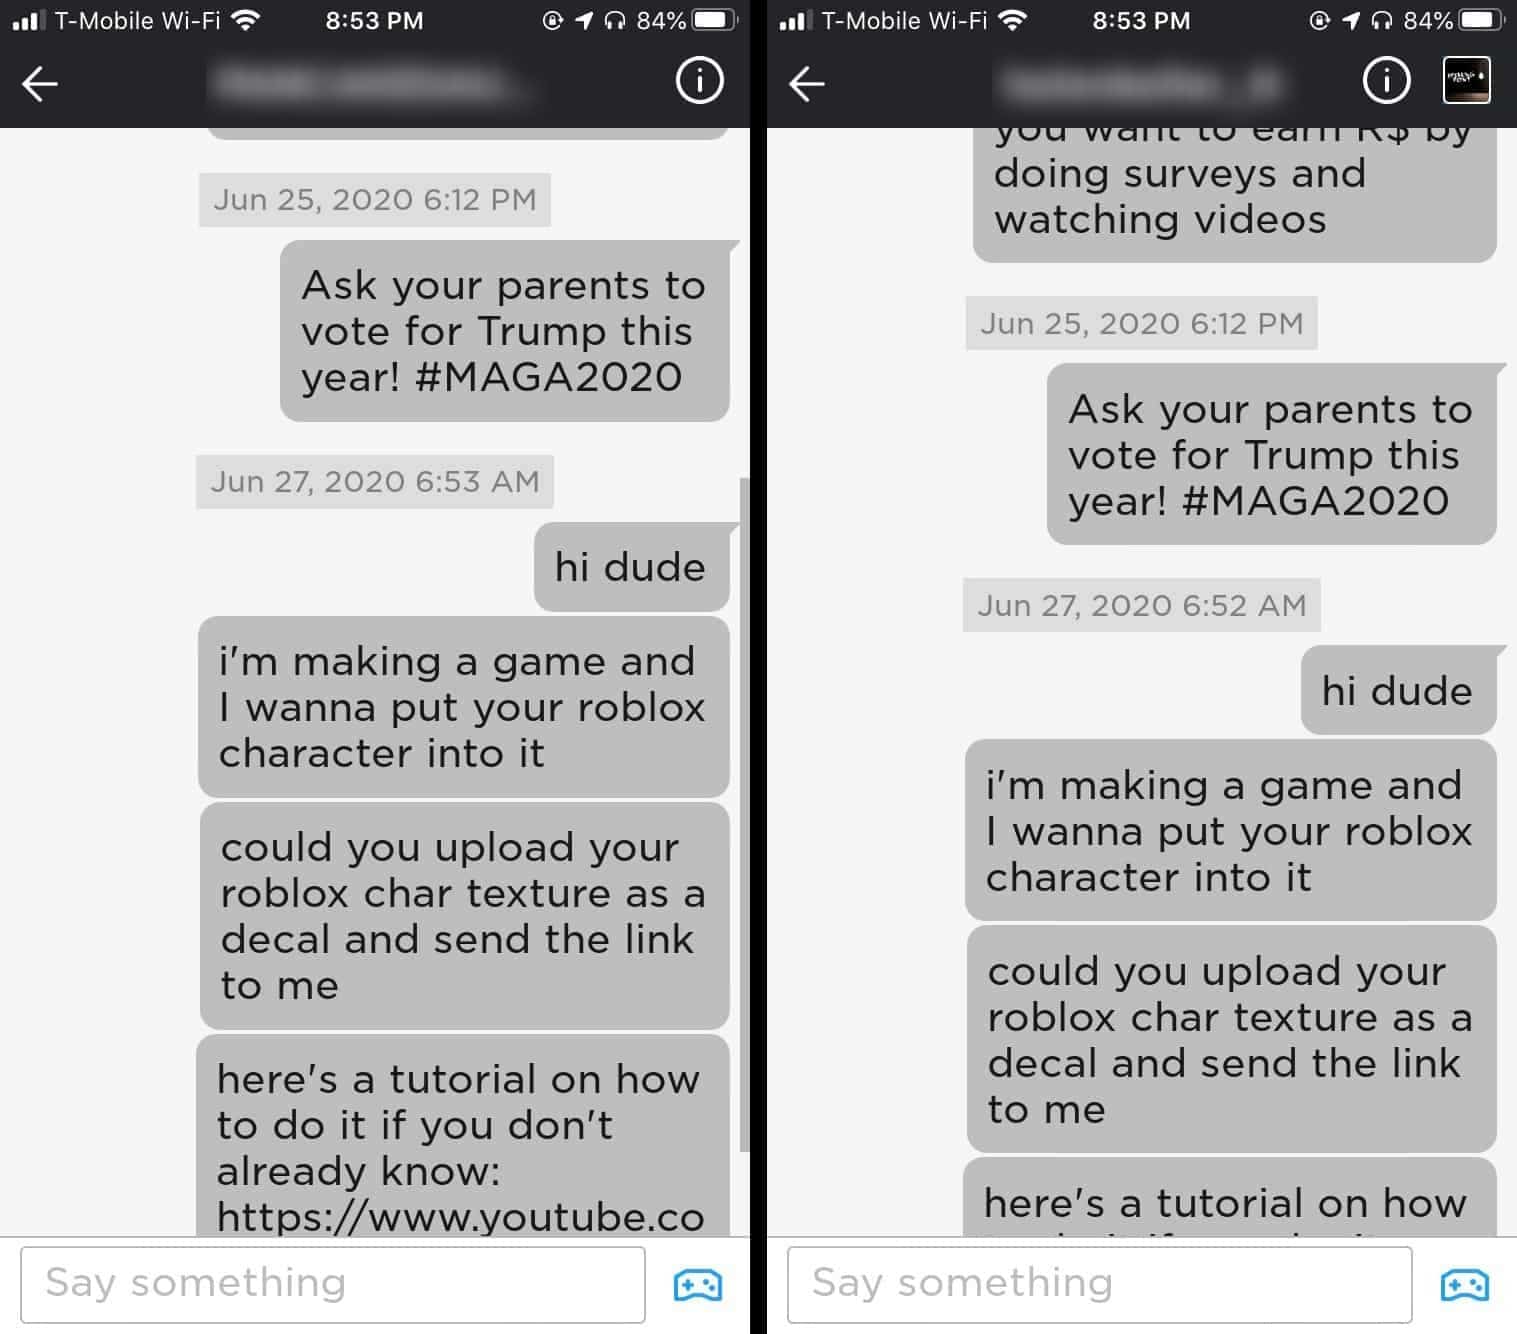 Hackers Deface Roblox Accounts With Pro Trump Messages - hacker do roblox 2020